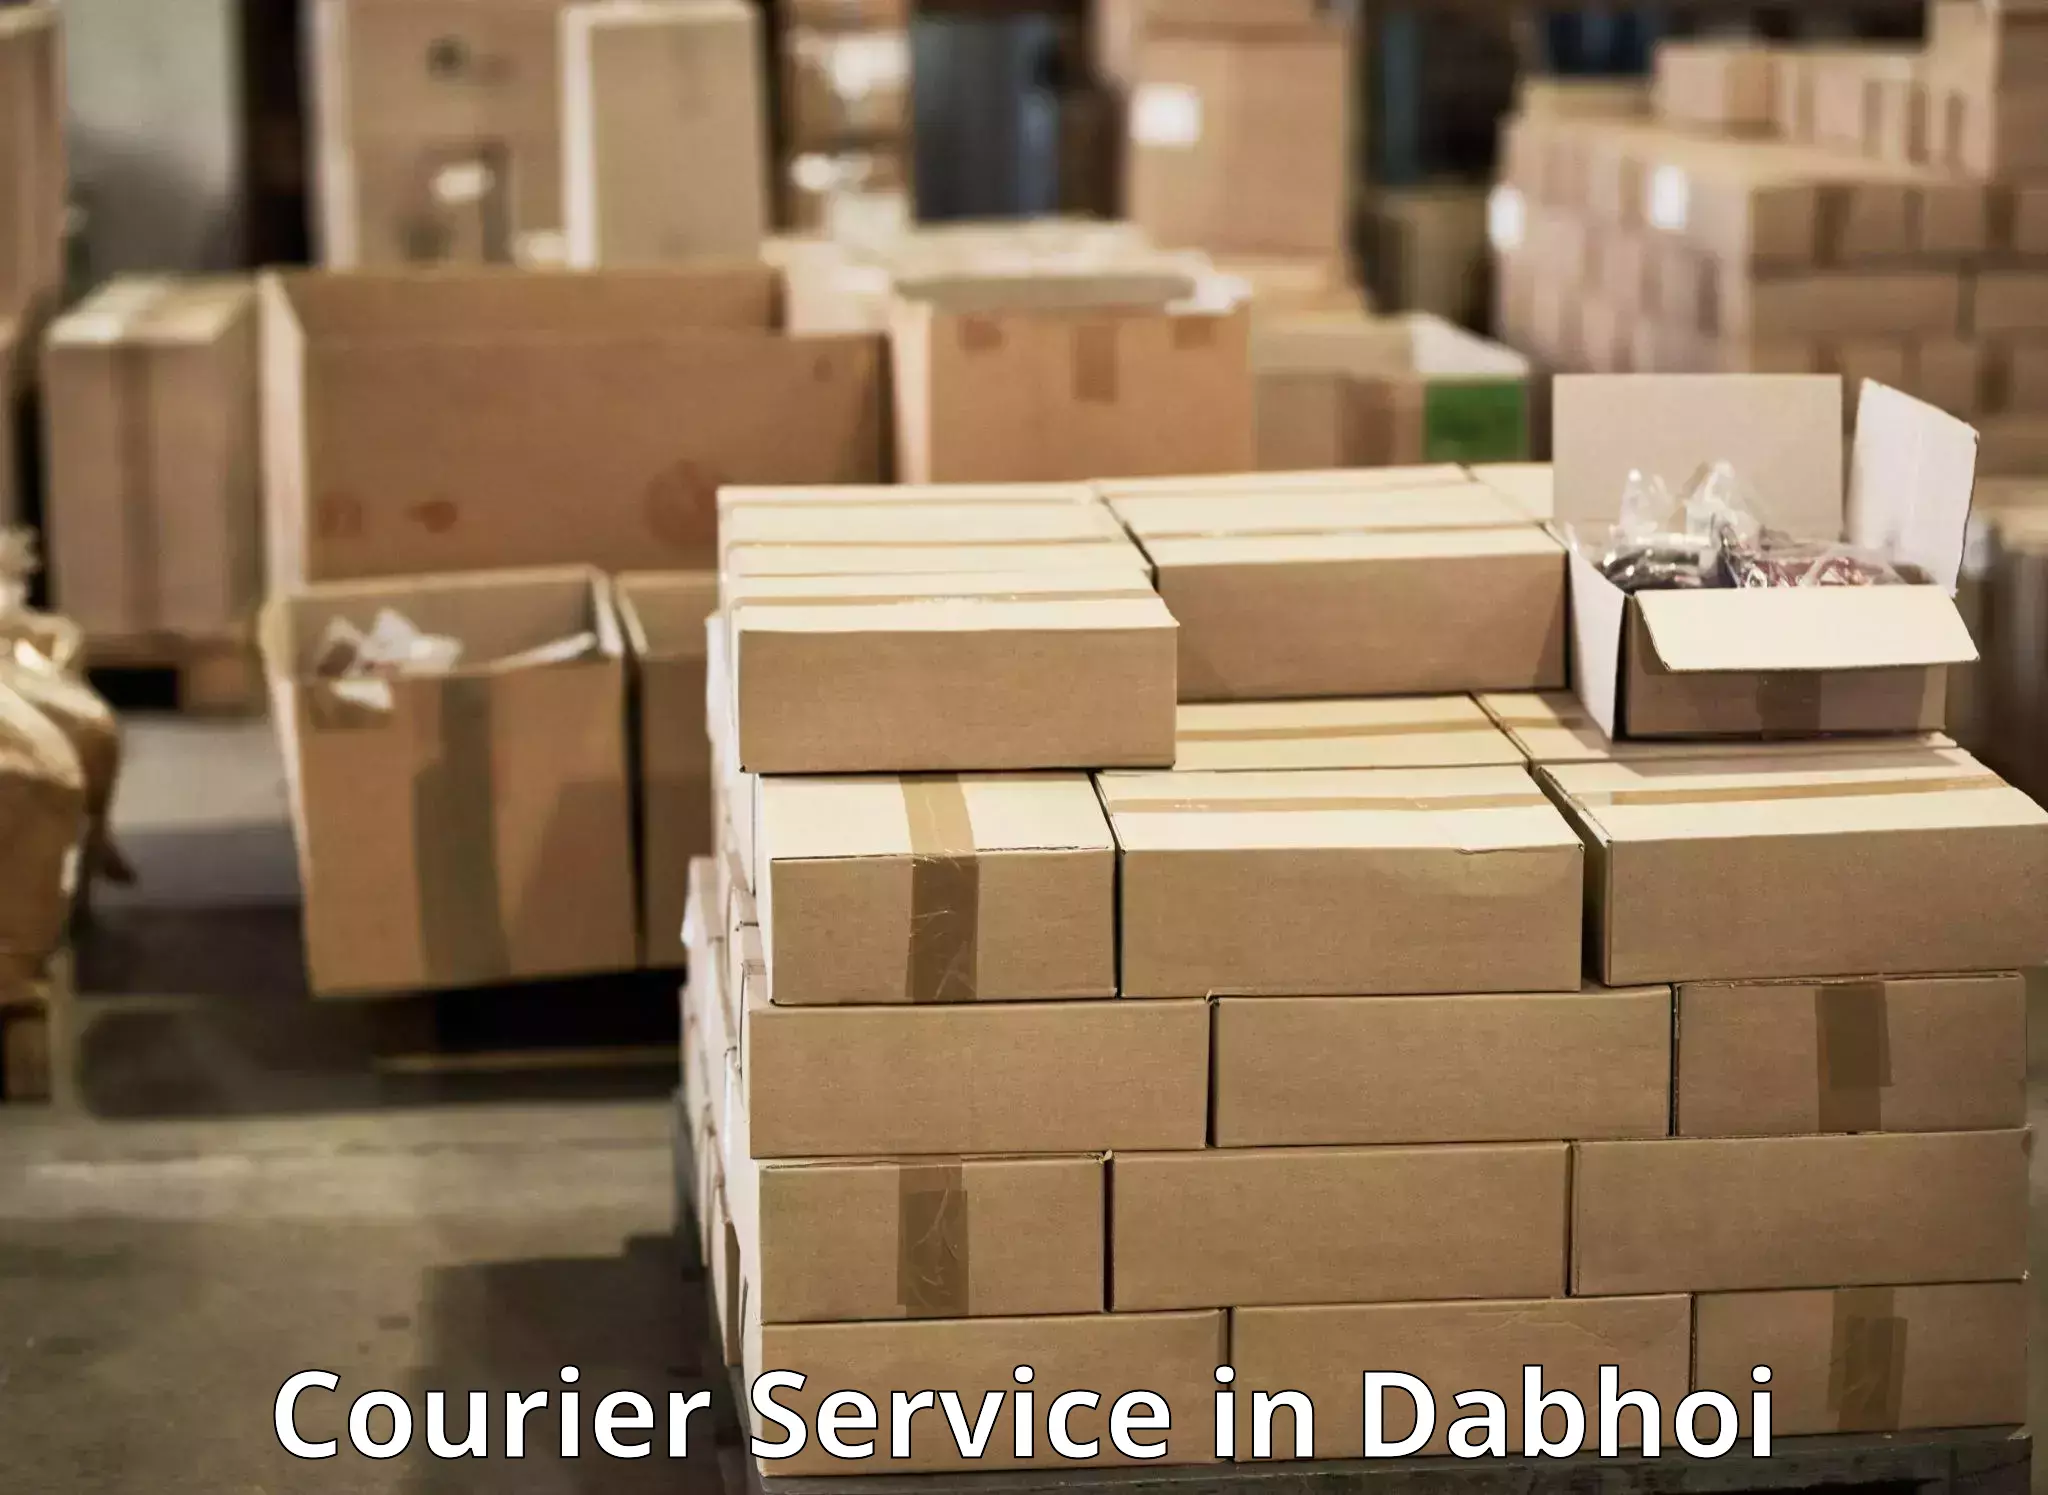 Full-service courier options in Dabhoi